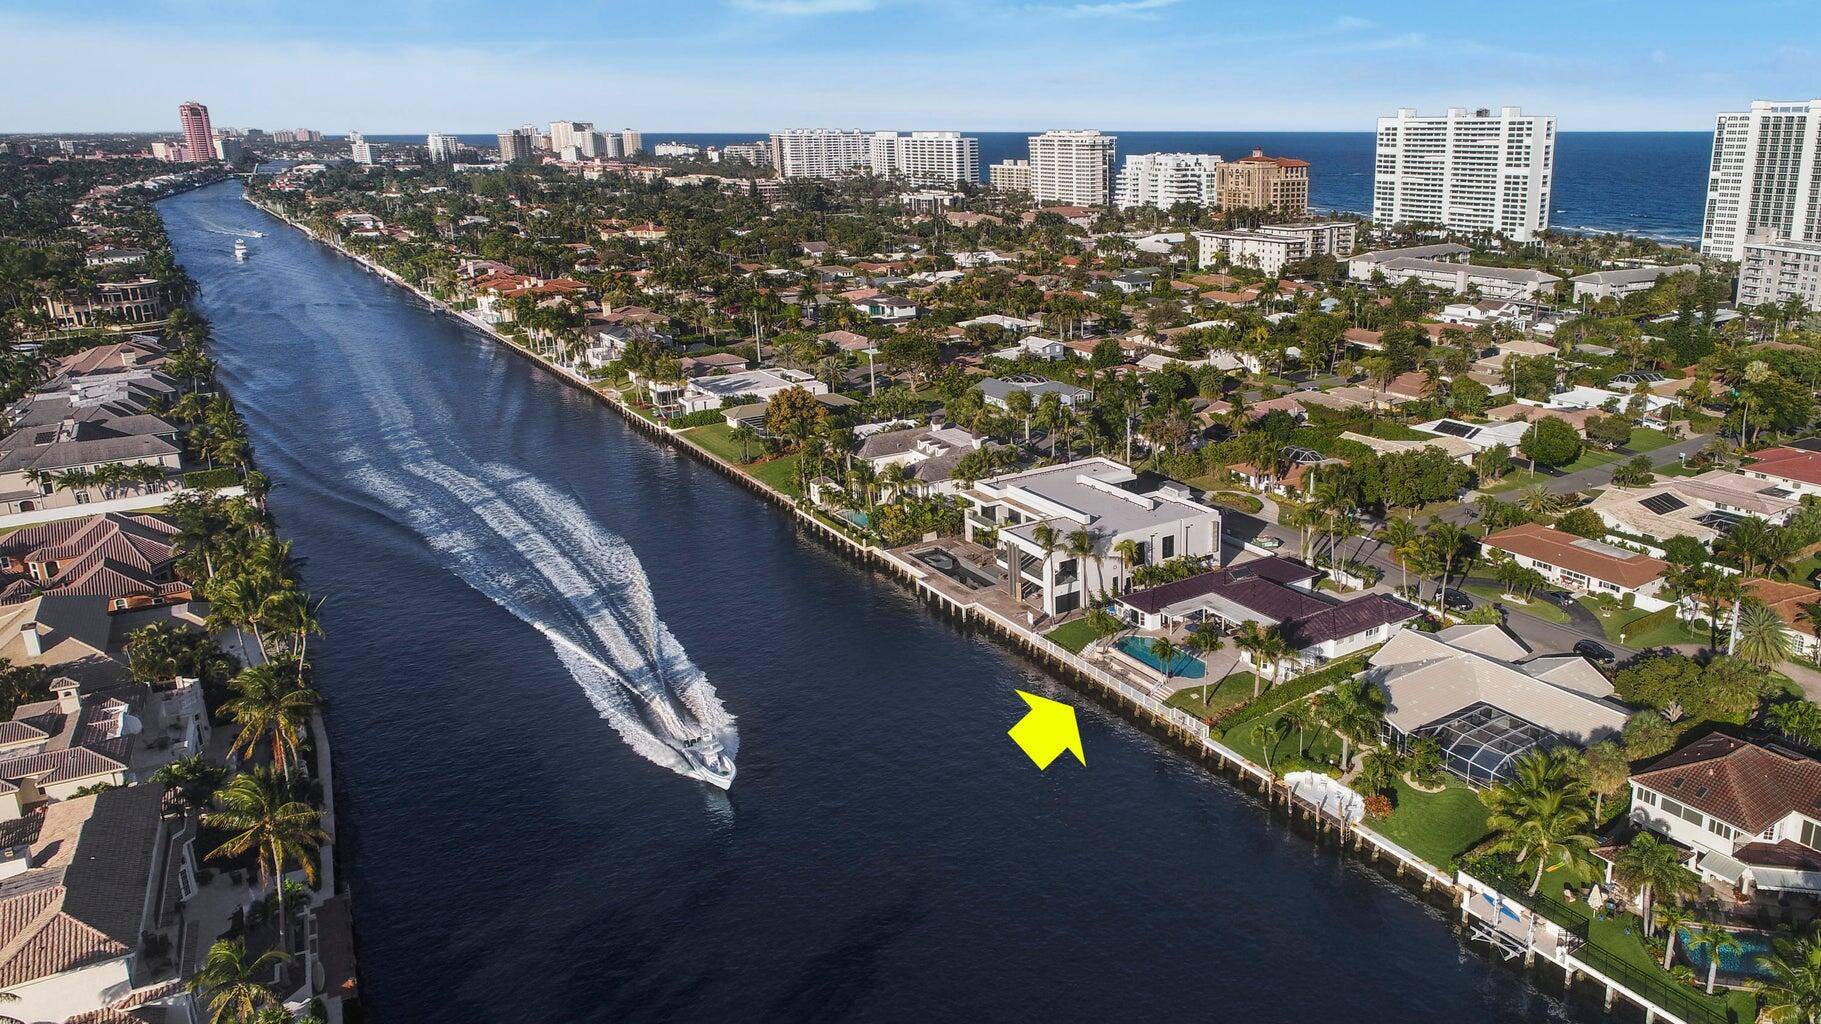 Fully furnished and turnkey with Flexible lease term Amazing opportunity to live on one of Boca Raton's most prestigious streets in a beautiful intracoastal home with wide water views !